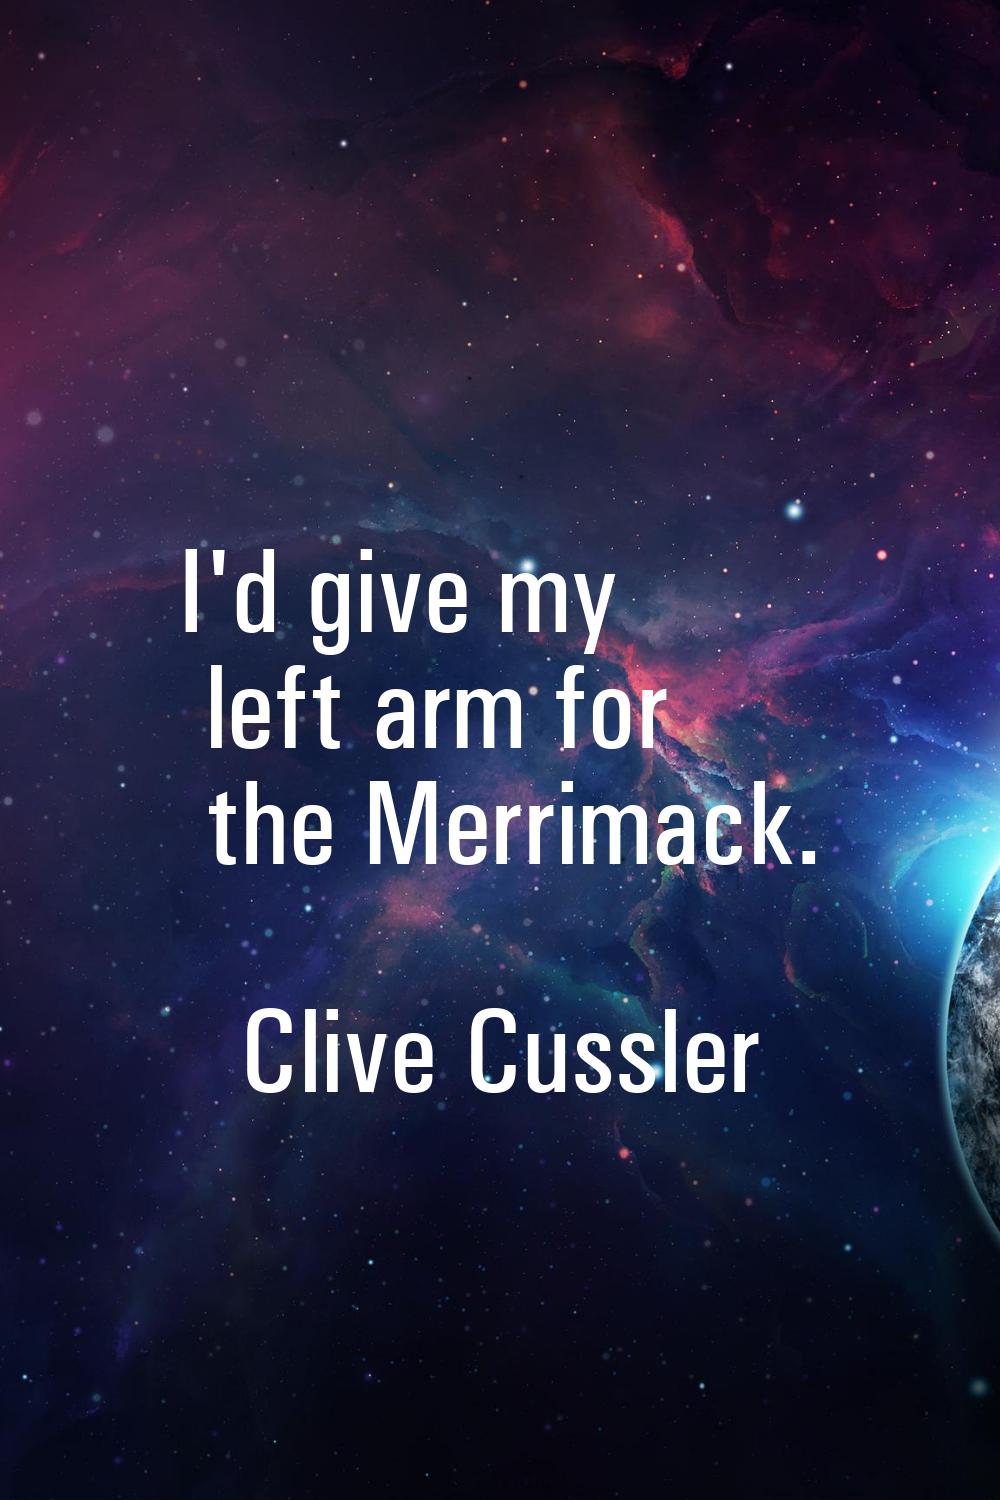 I'd give my left arm for the Merrimack.